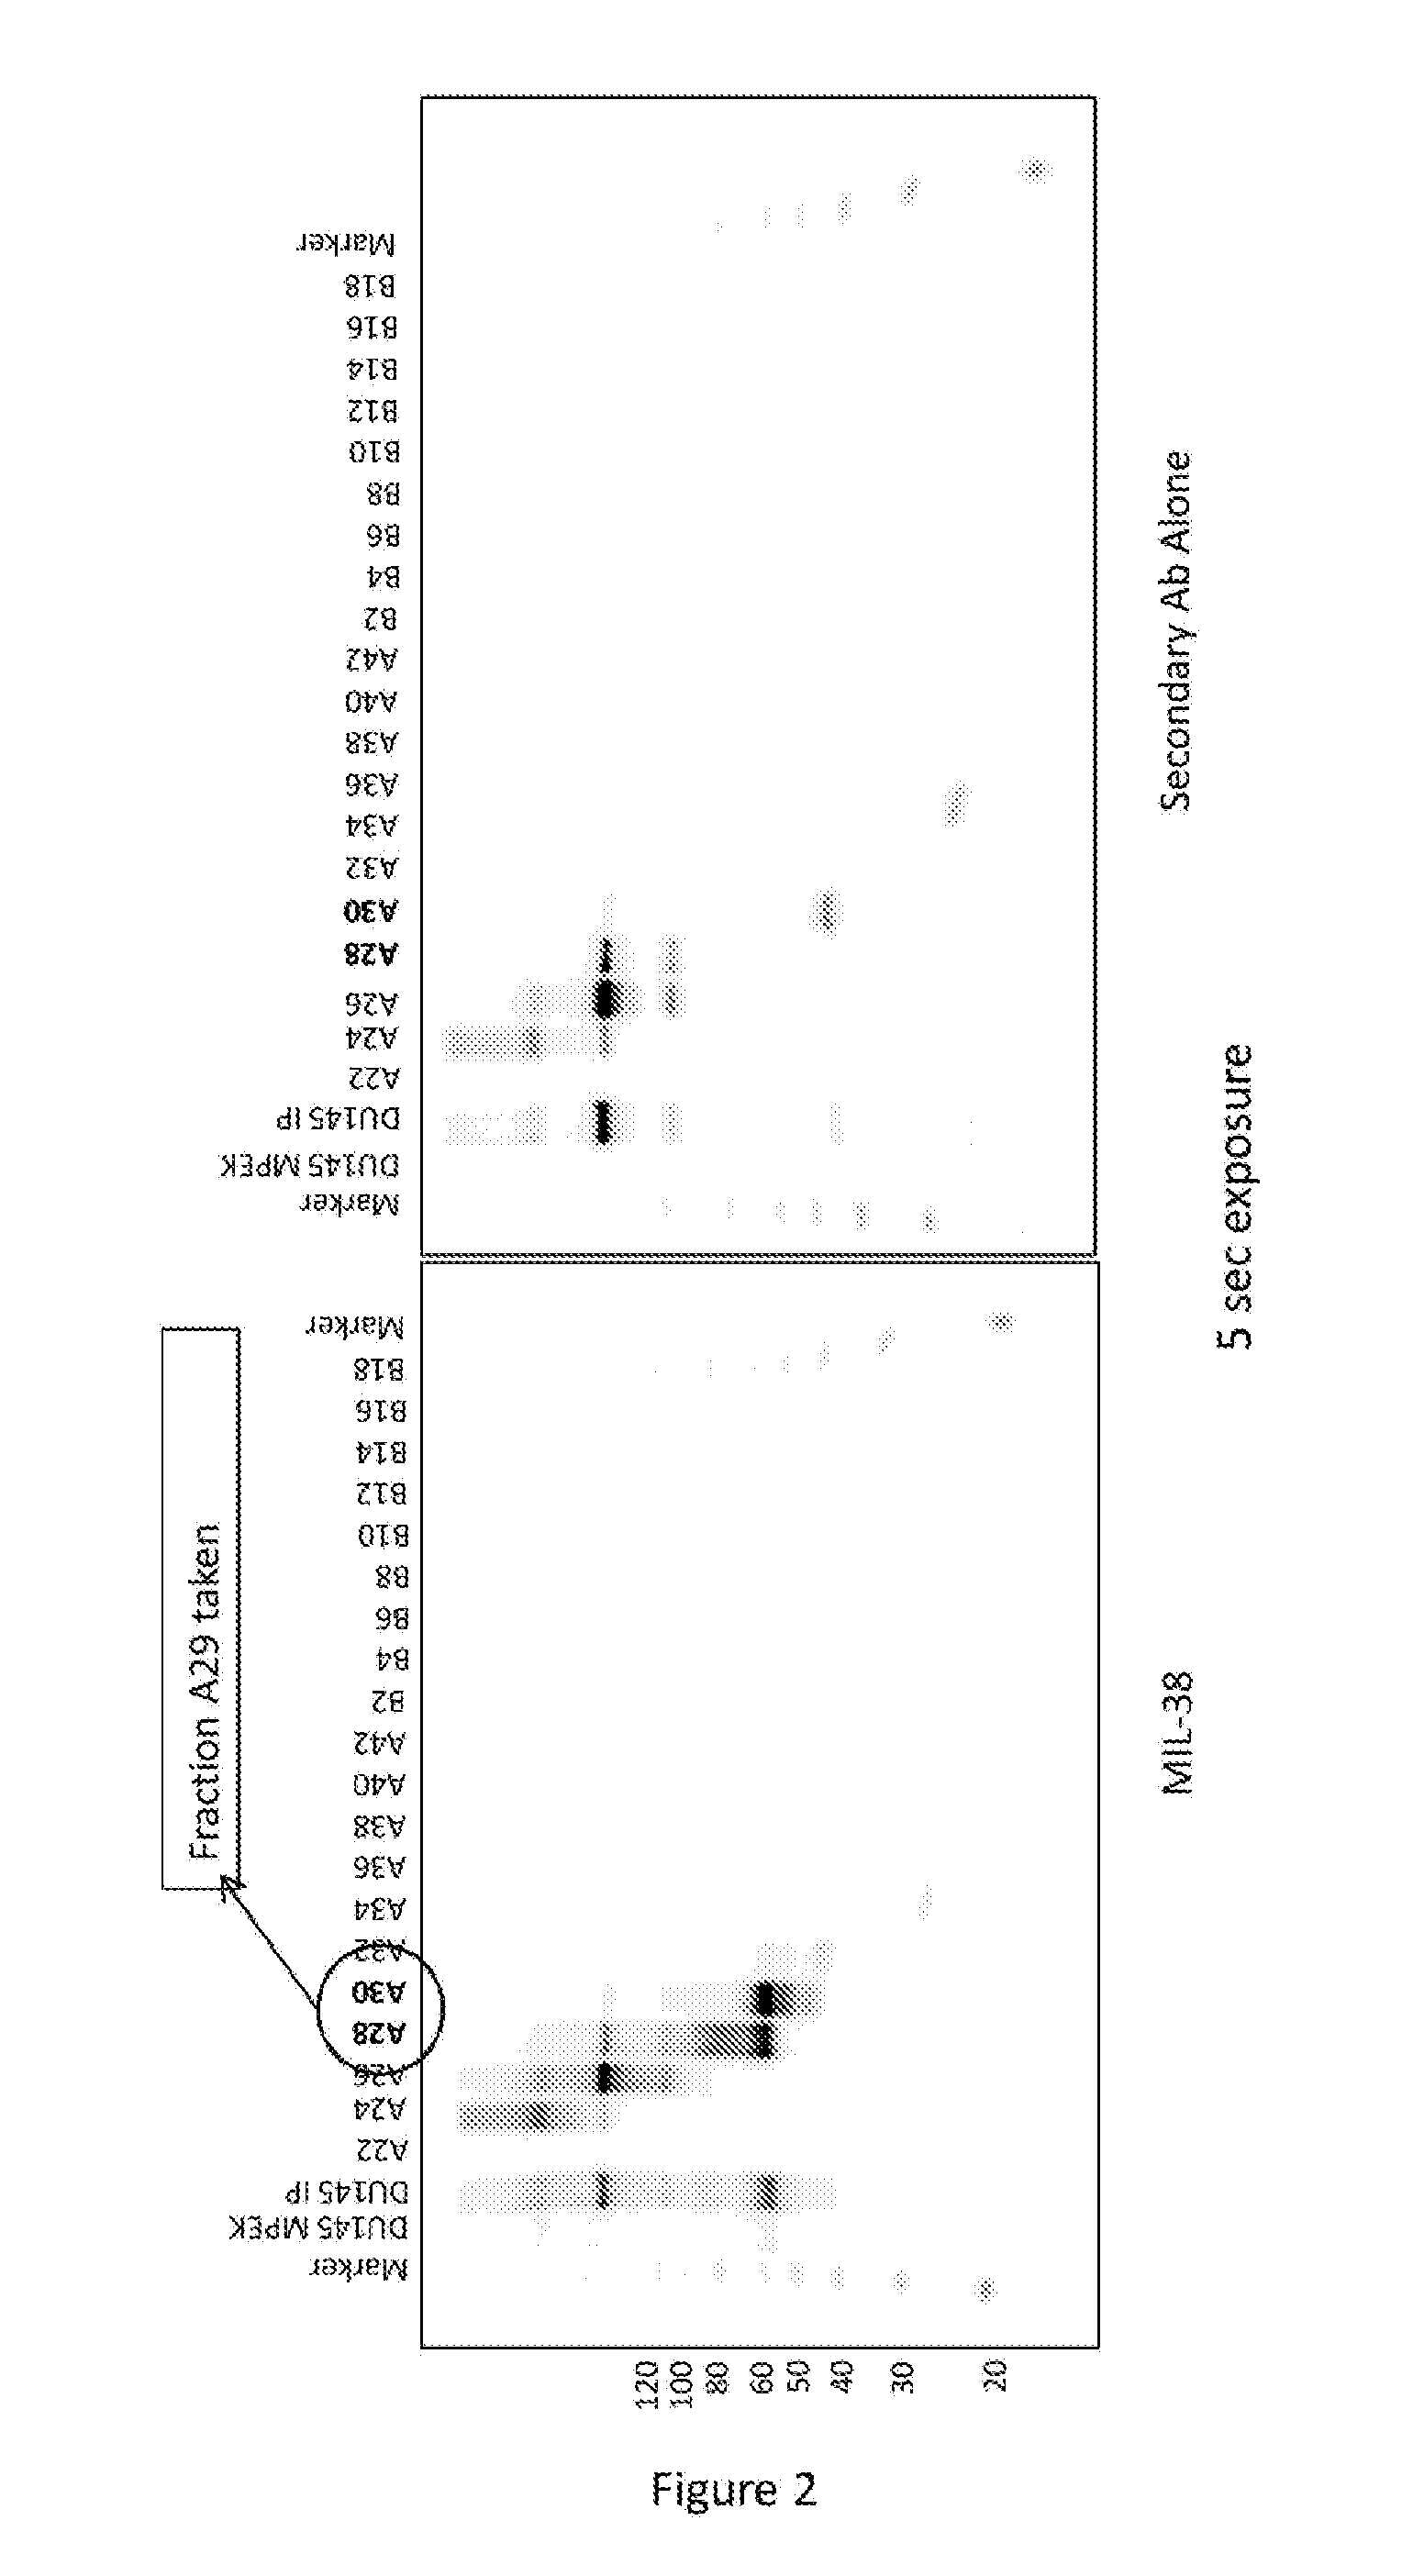 Cell surface prostate cancer antigen for diagnosis